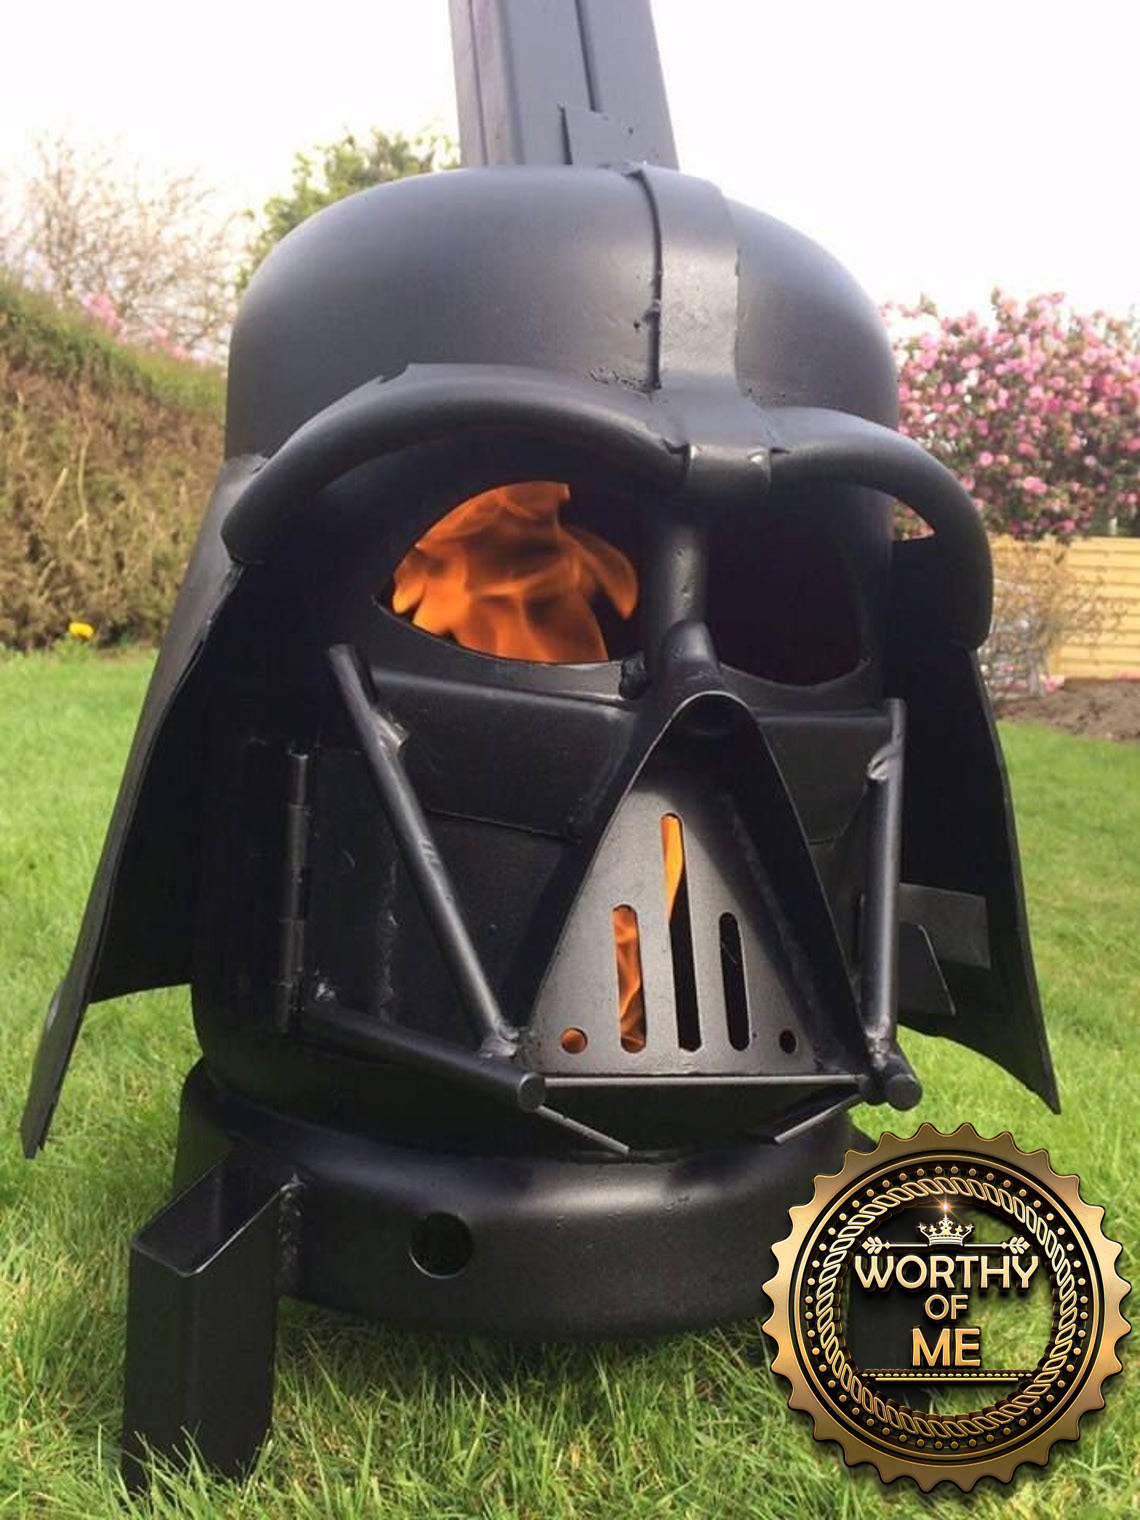 Darth Vader Fire Pit Worthy Of His, Darth Vader Fire Pit Plans